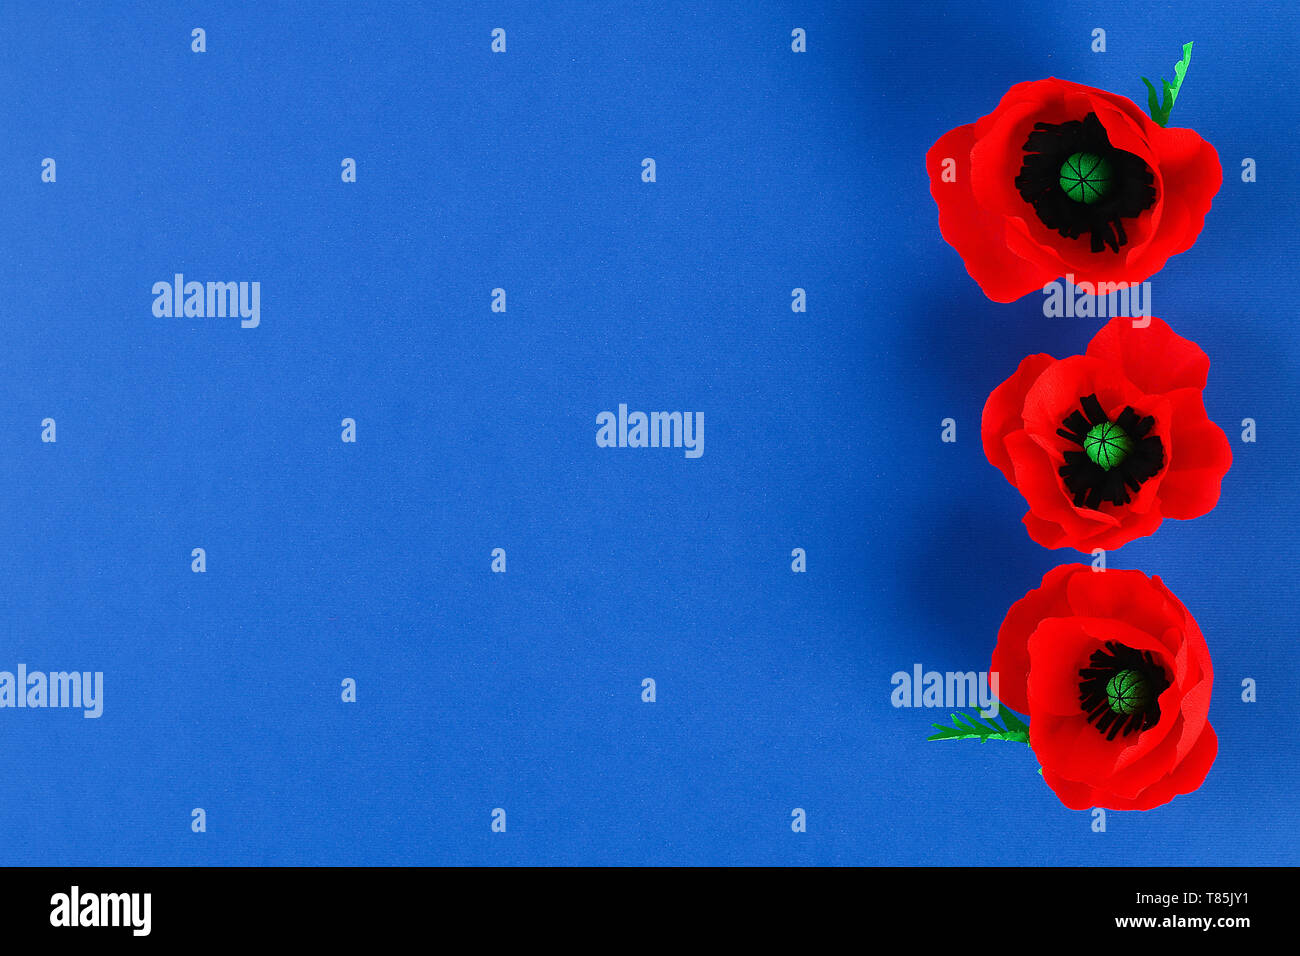 Diy paper red poppy Anzac Day, Remembrance, Remember, Memorial day made of crepe paper on blue background. Symbol war. Gift idea, decor. Step by step. Stock Photo